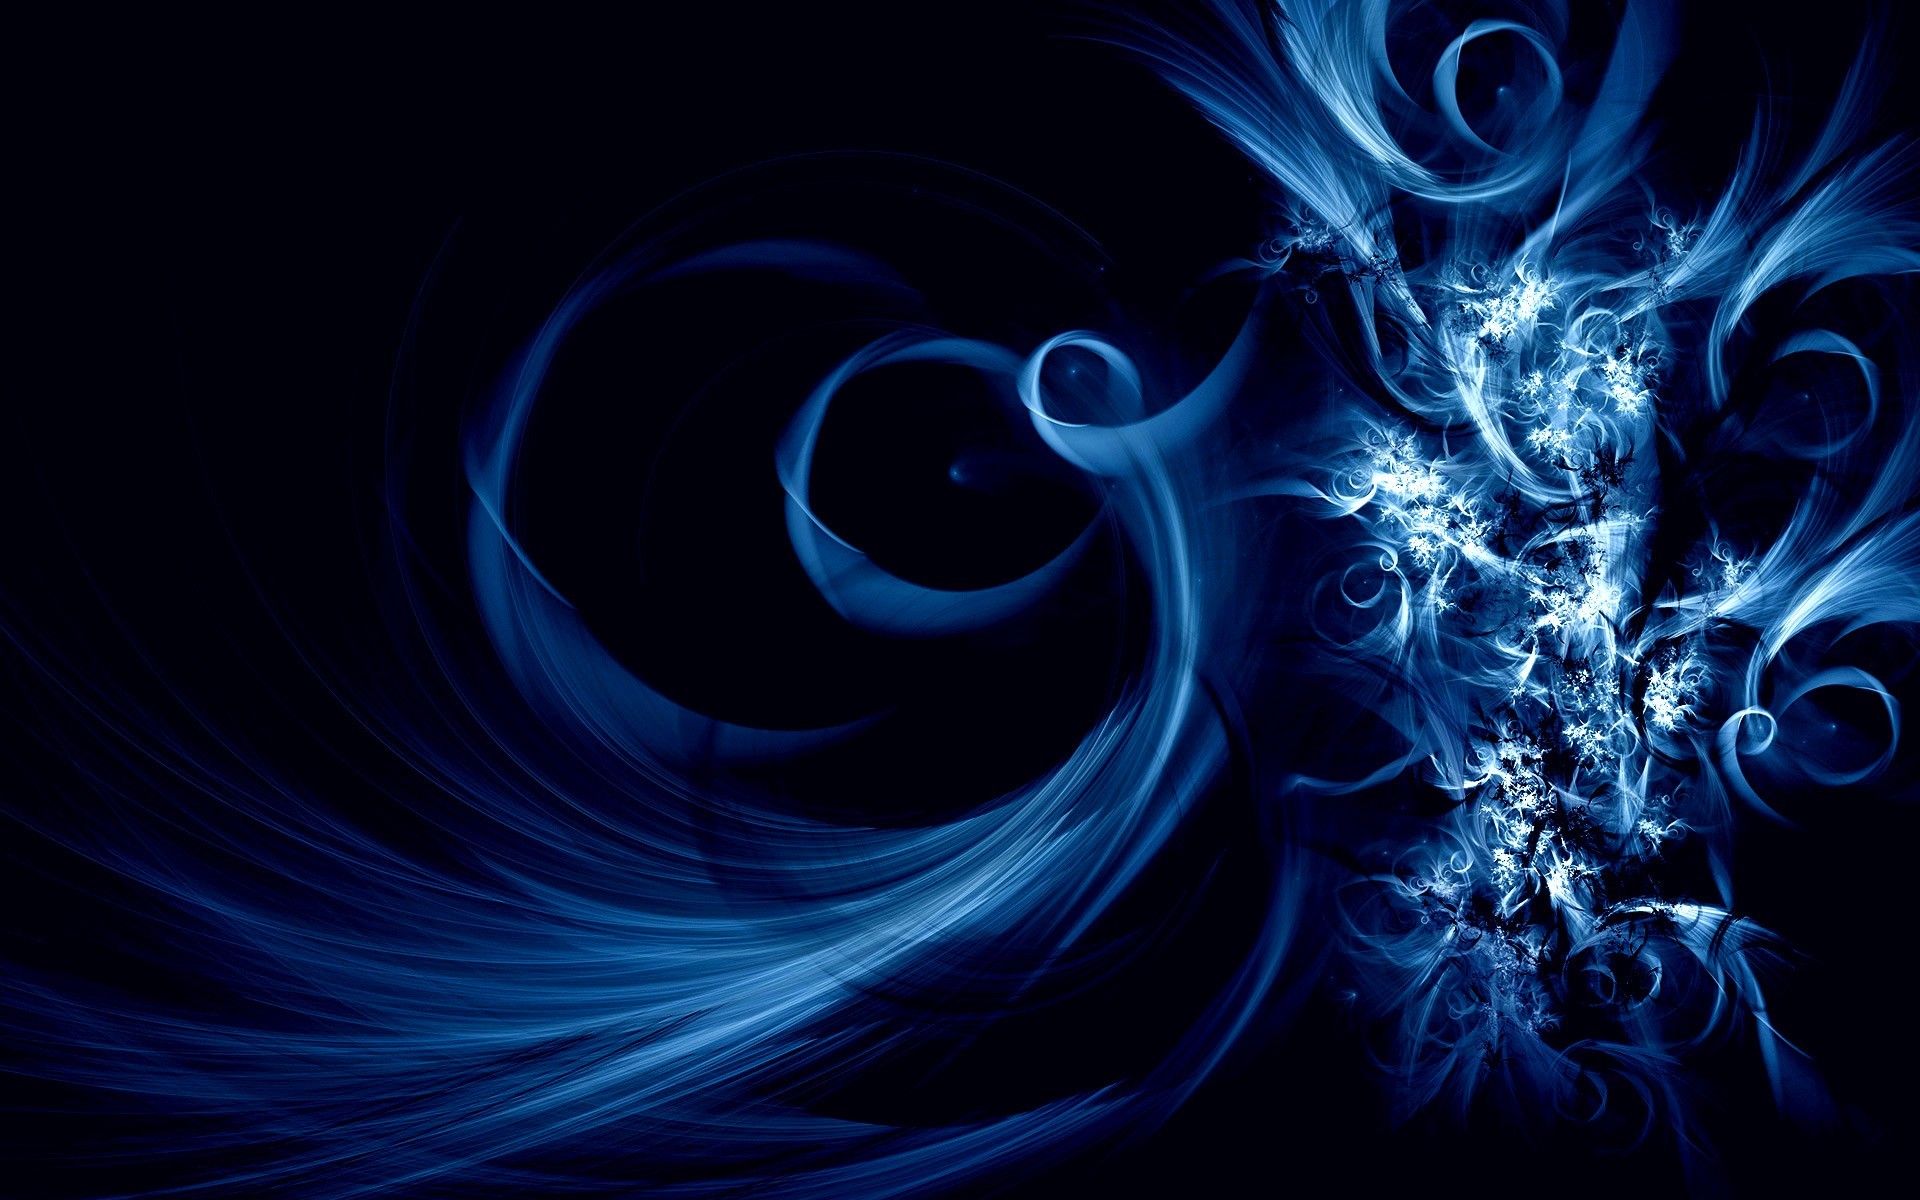 1920x1200 Related Desktop Backgrounds. Black And Blue Abstract